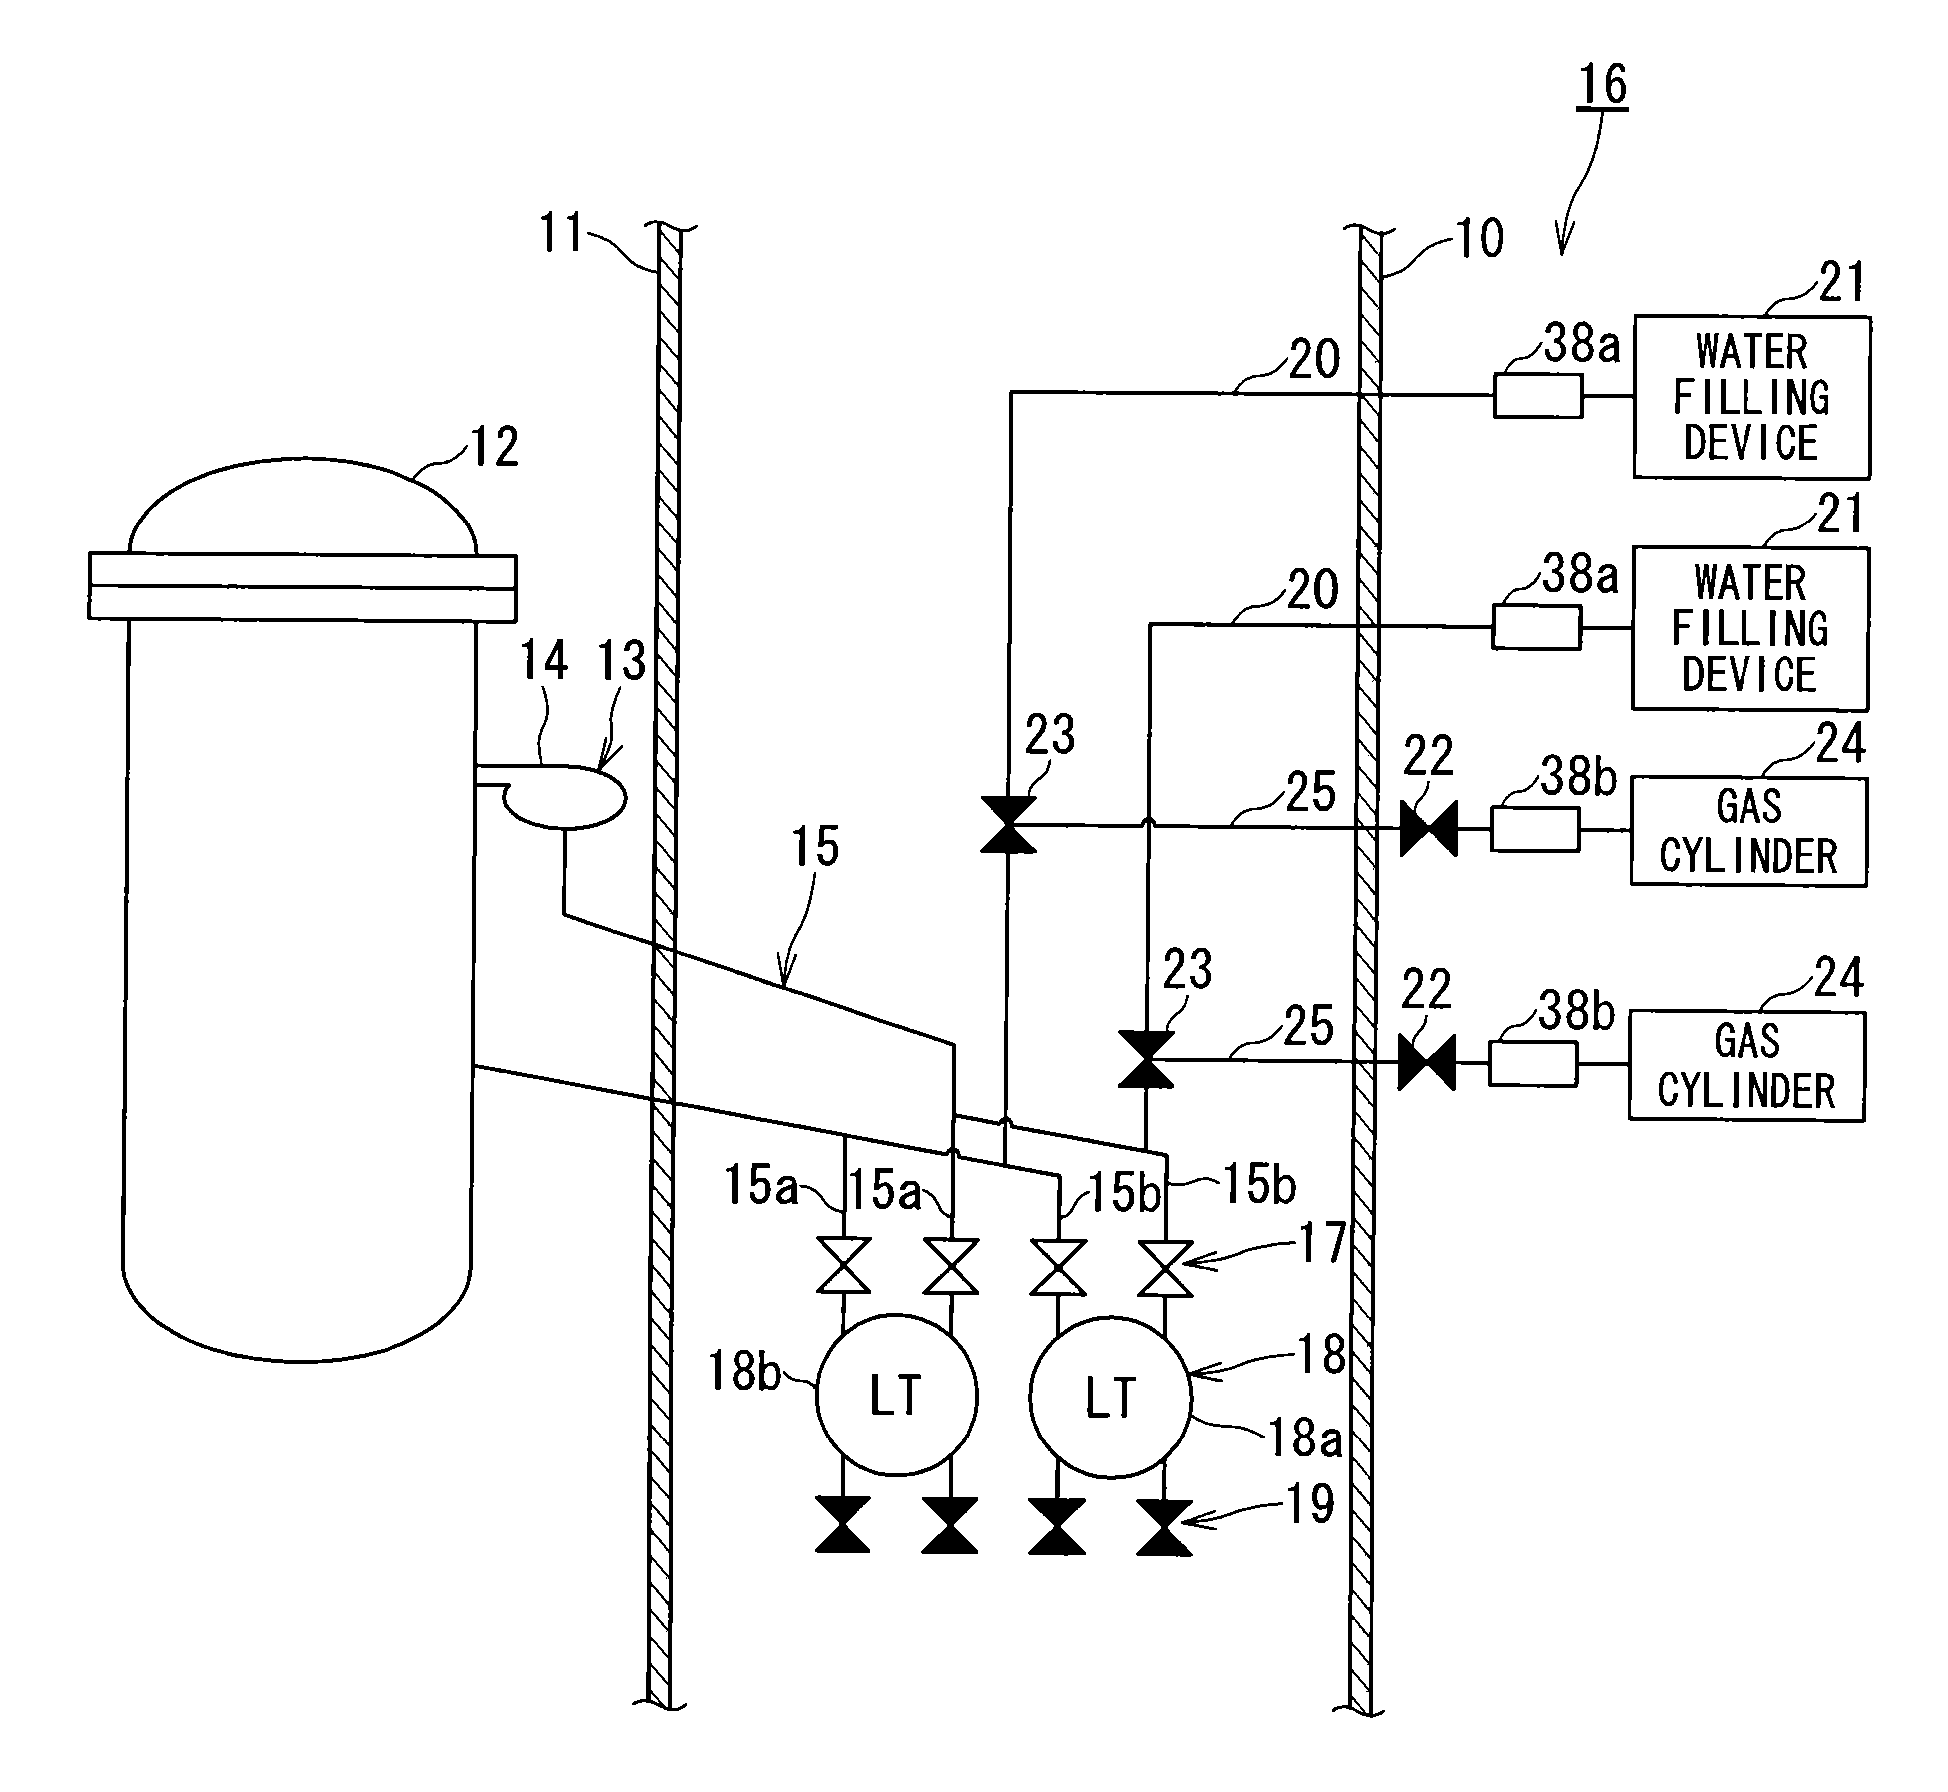 Water filling system for reactor water level gauge